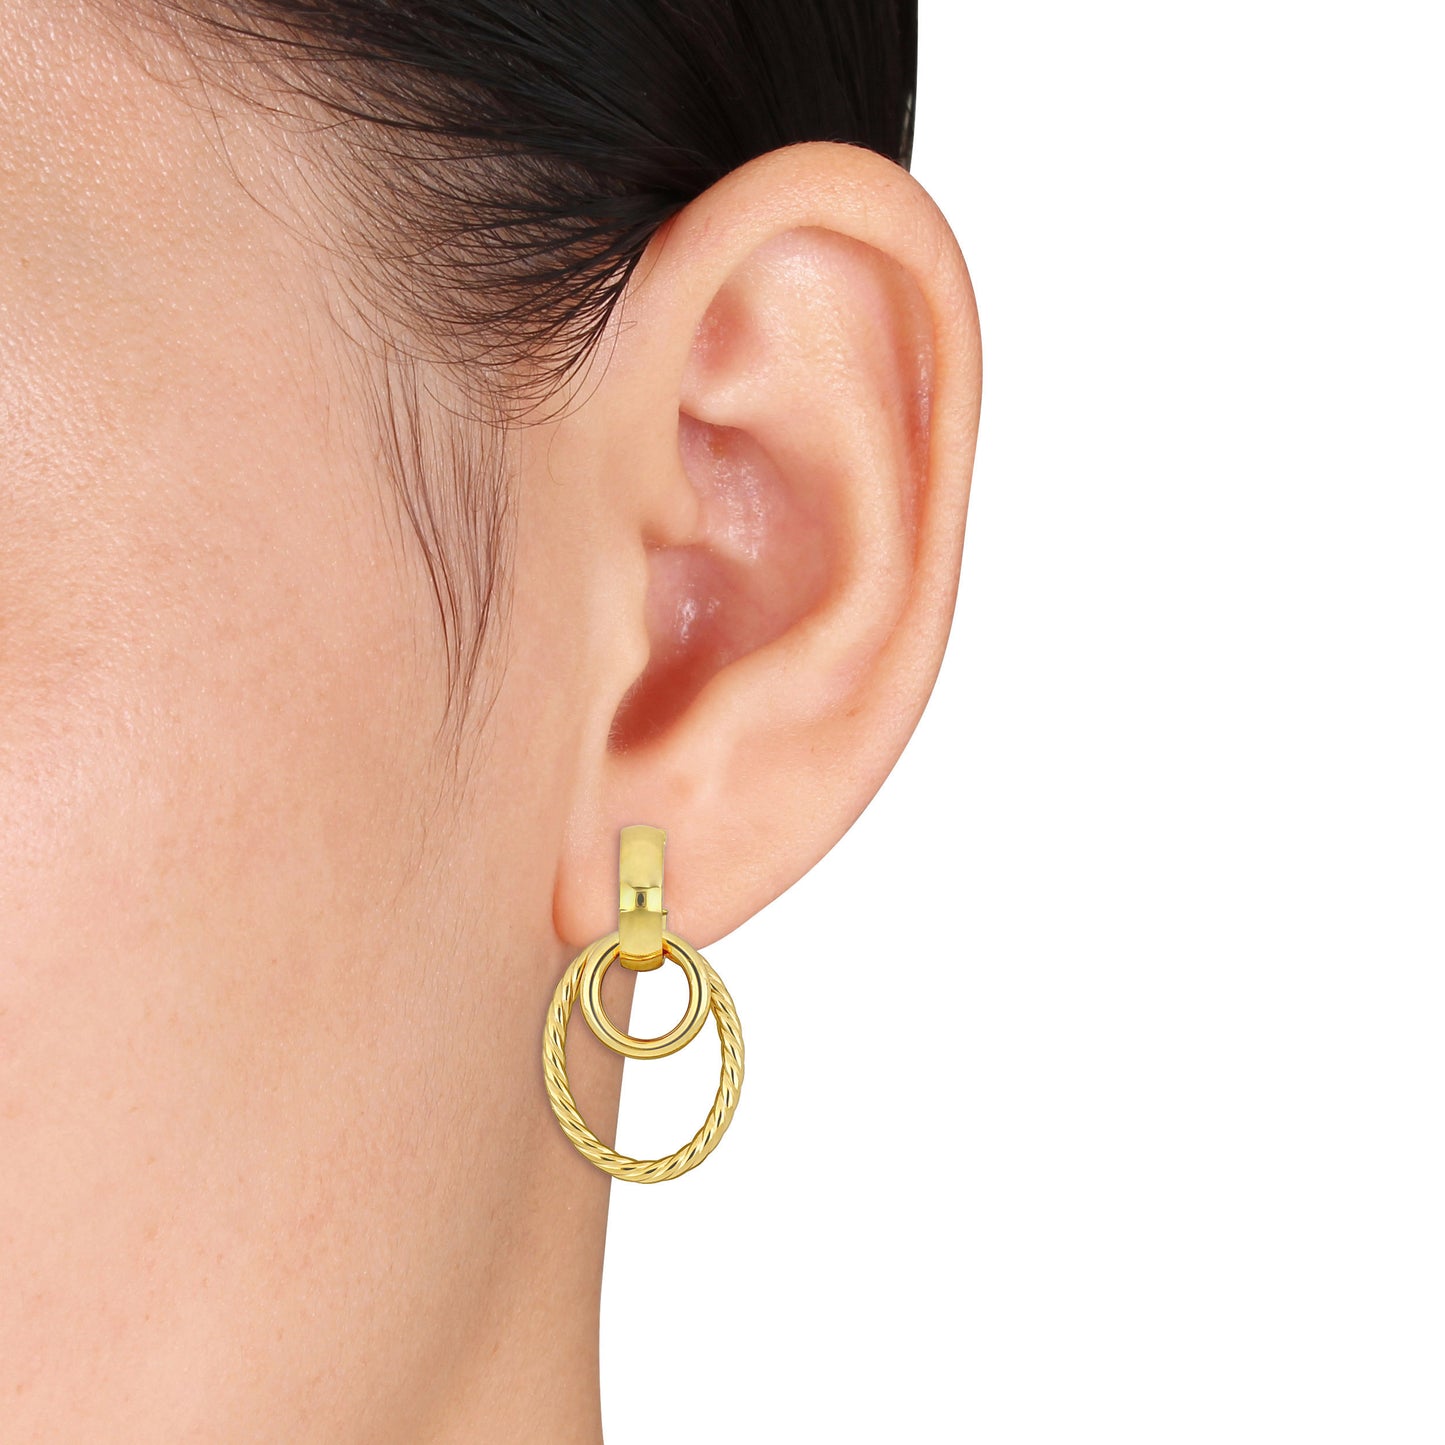 Hanging Douple Hoops in 14K Yellow Gold